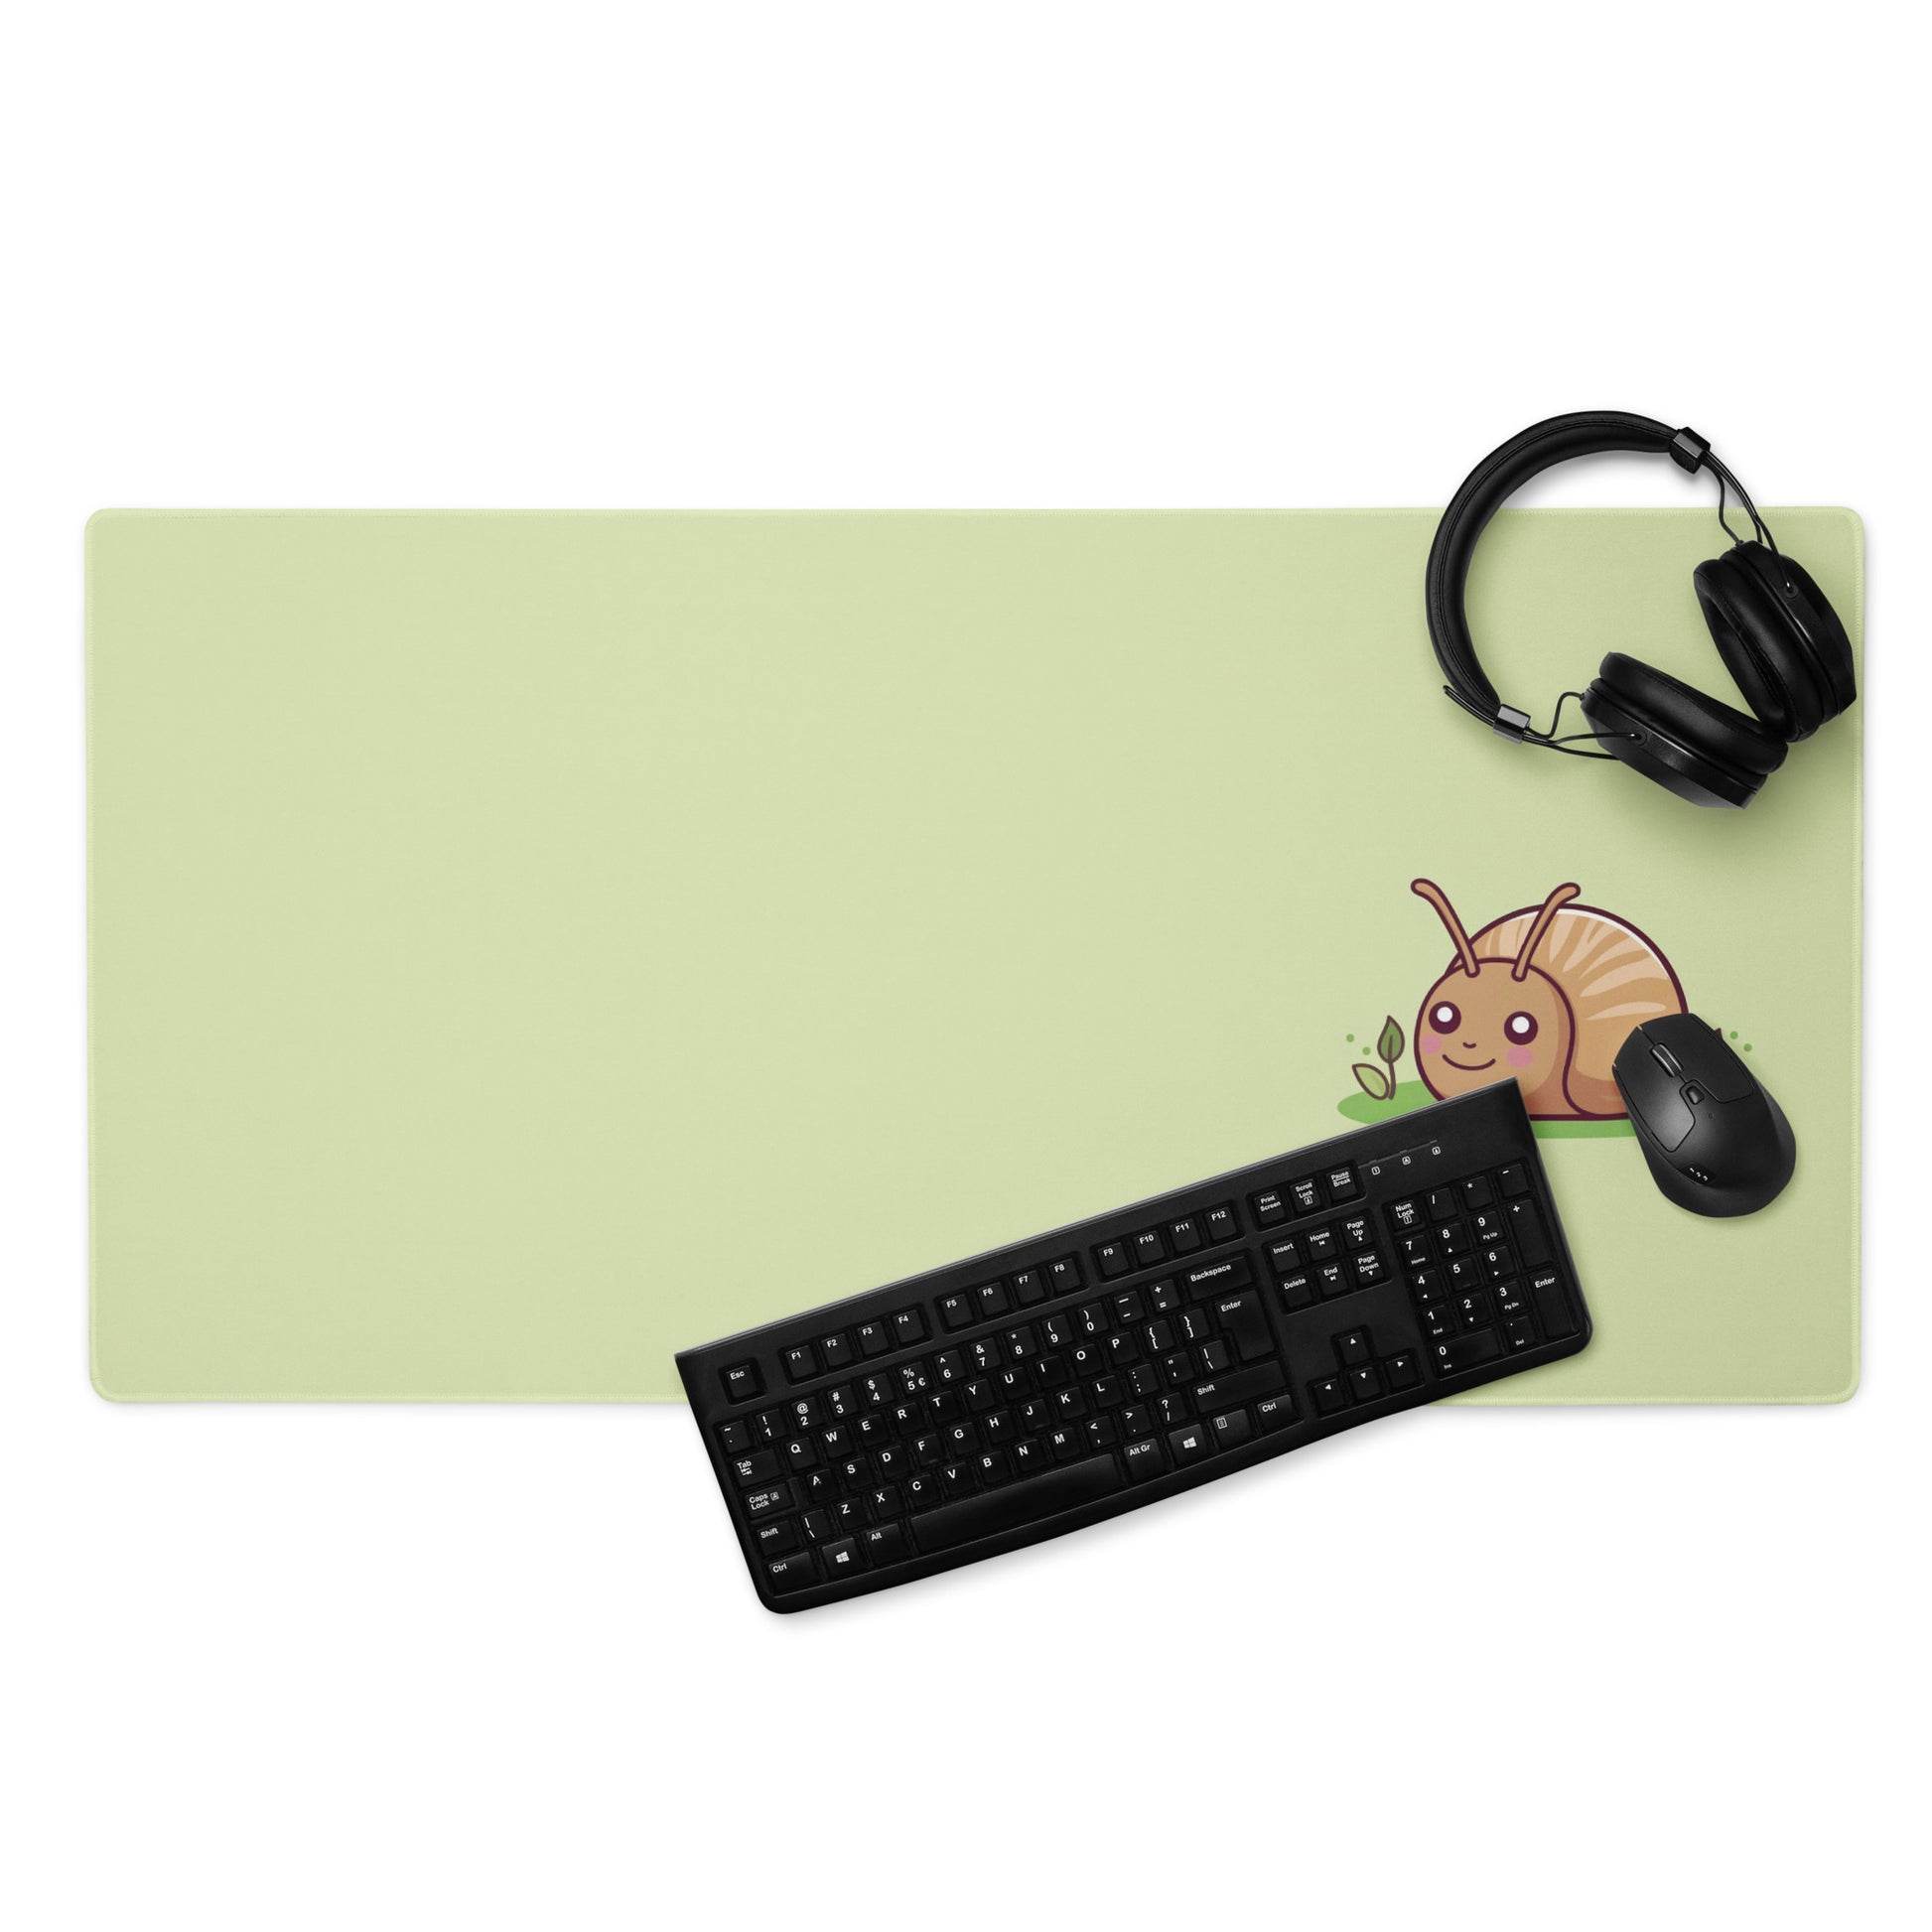 A 36" x 18" desk pad with a cute snail on it displayed with a keyboard, headphones and a mouse. Green in color.